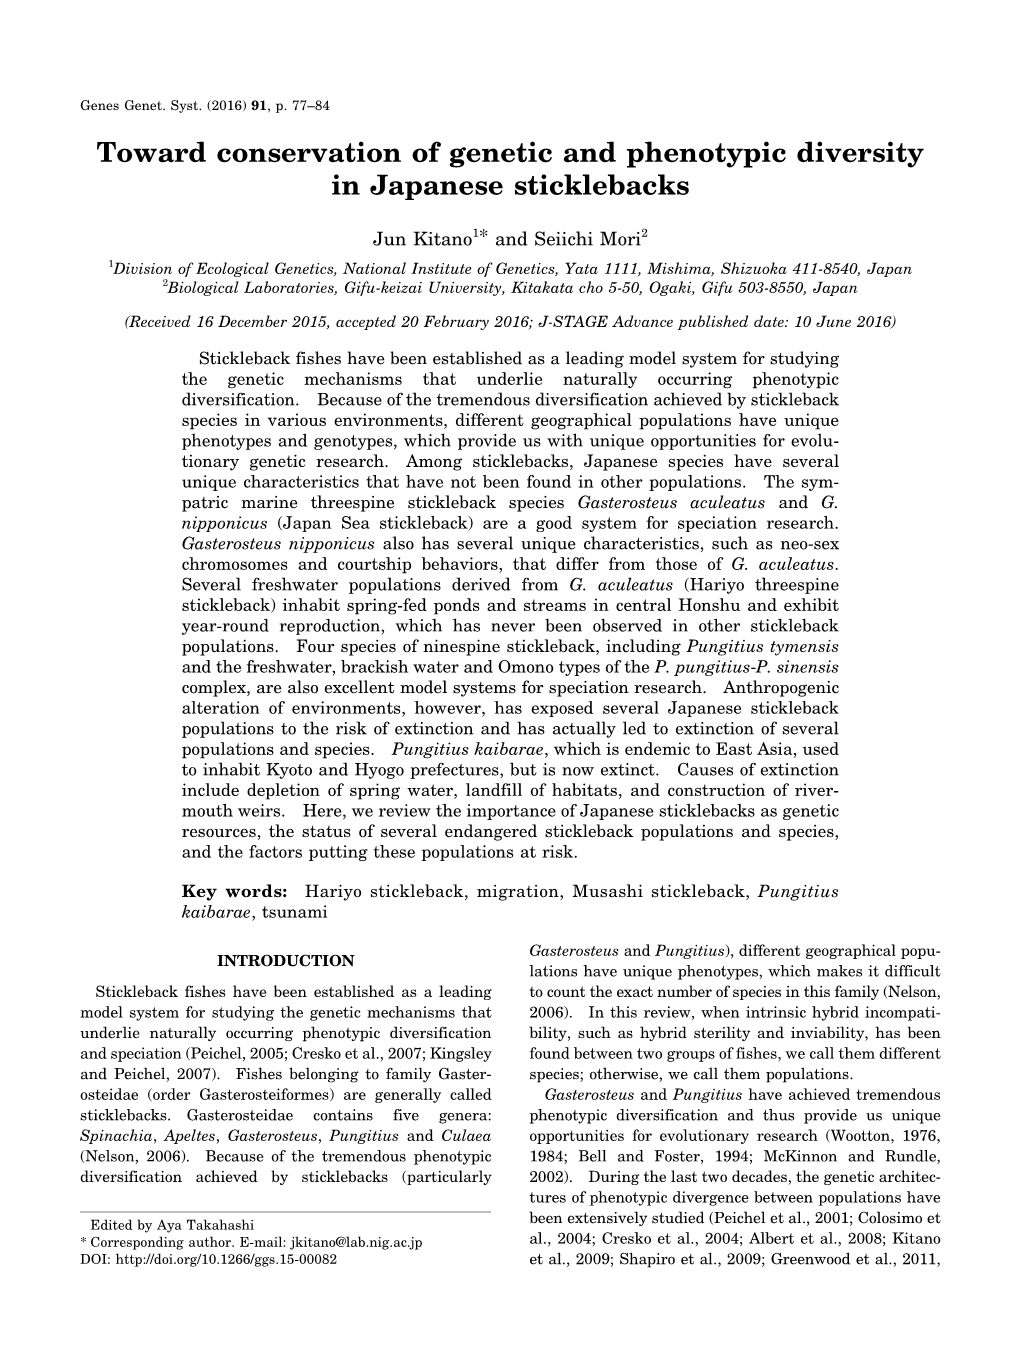 Toward Conservation of Genetic and Phenotypic Diversity in Japanese Sticklebacks